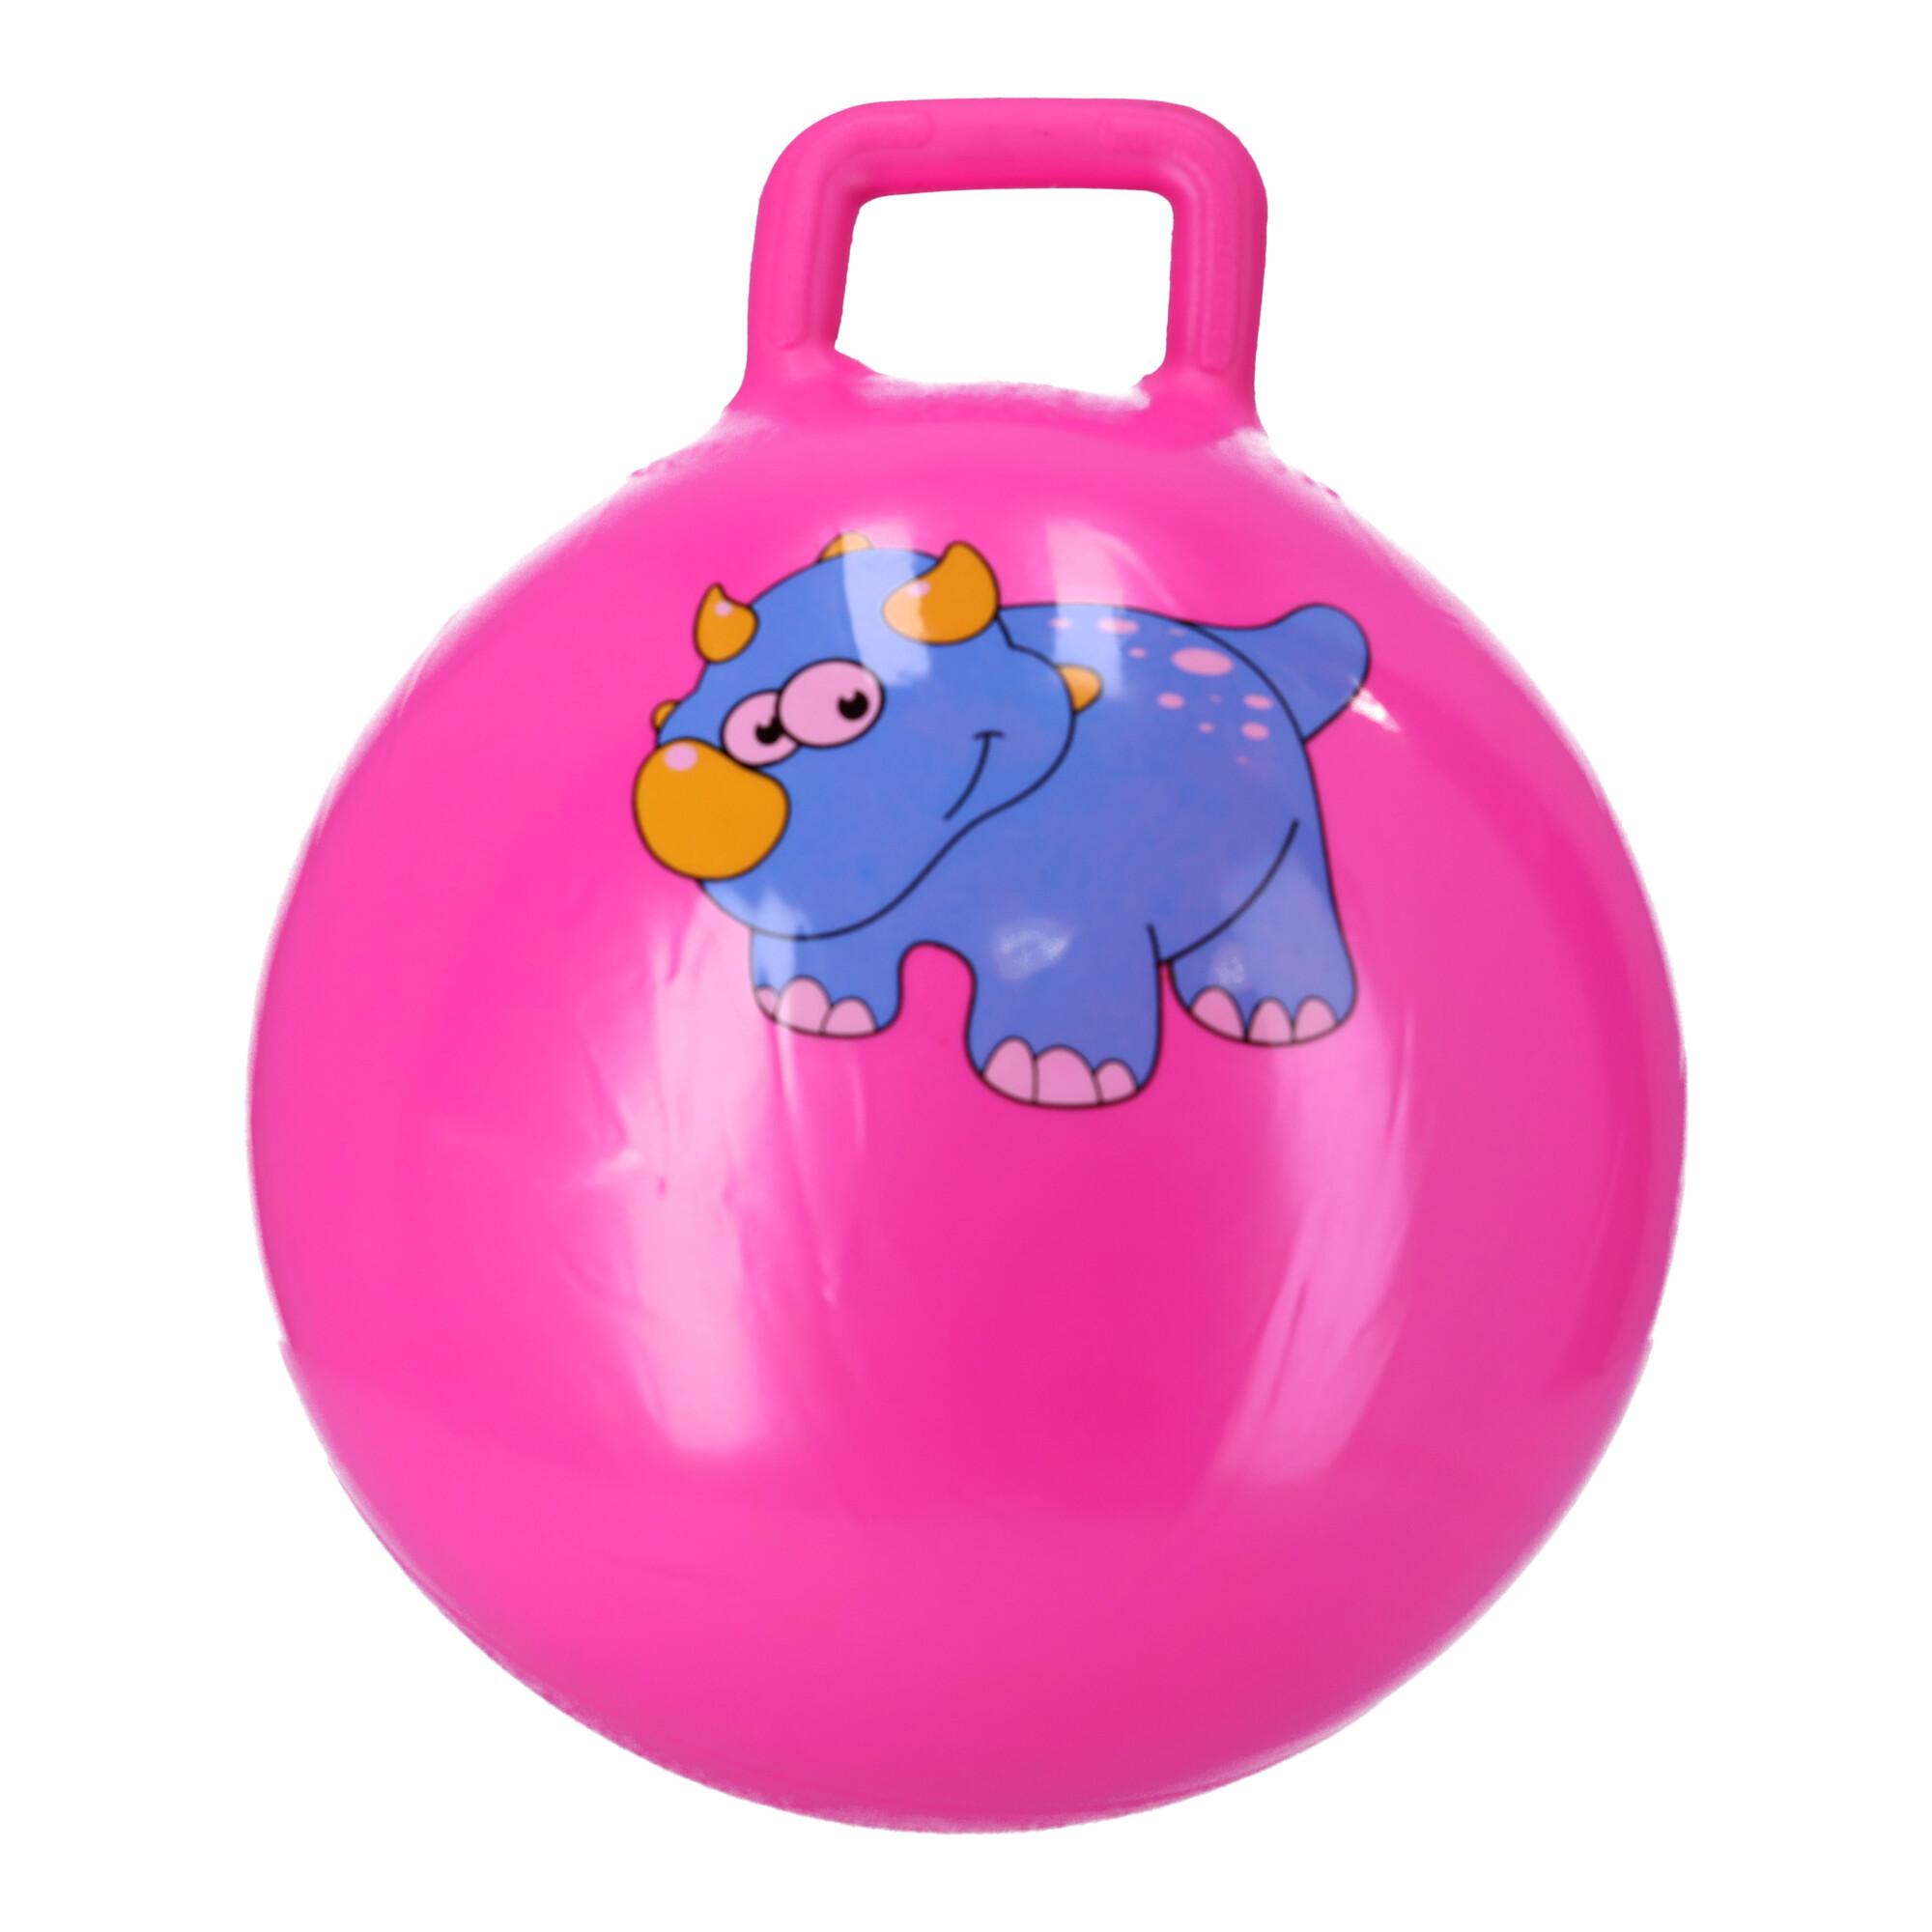 Jumping ball, jumper for children with handles - pink